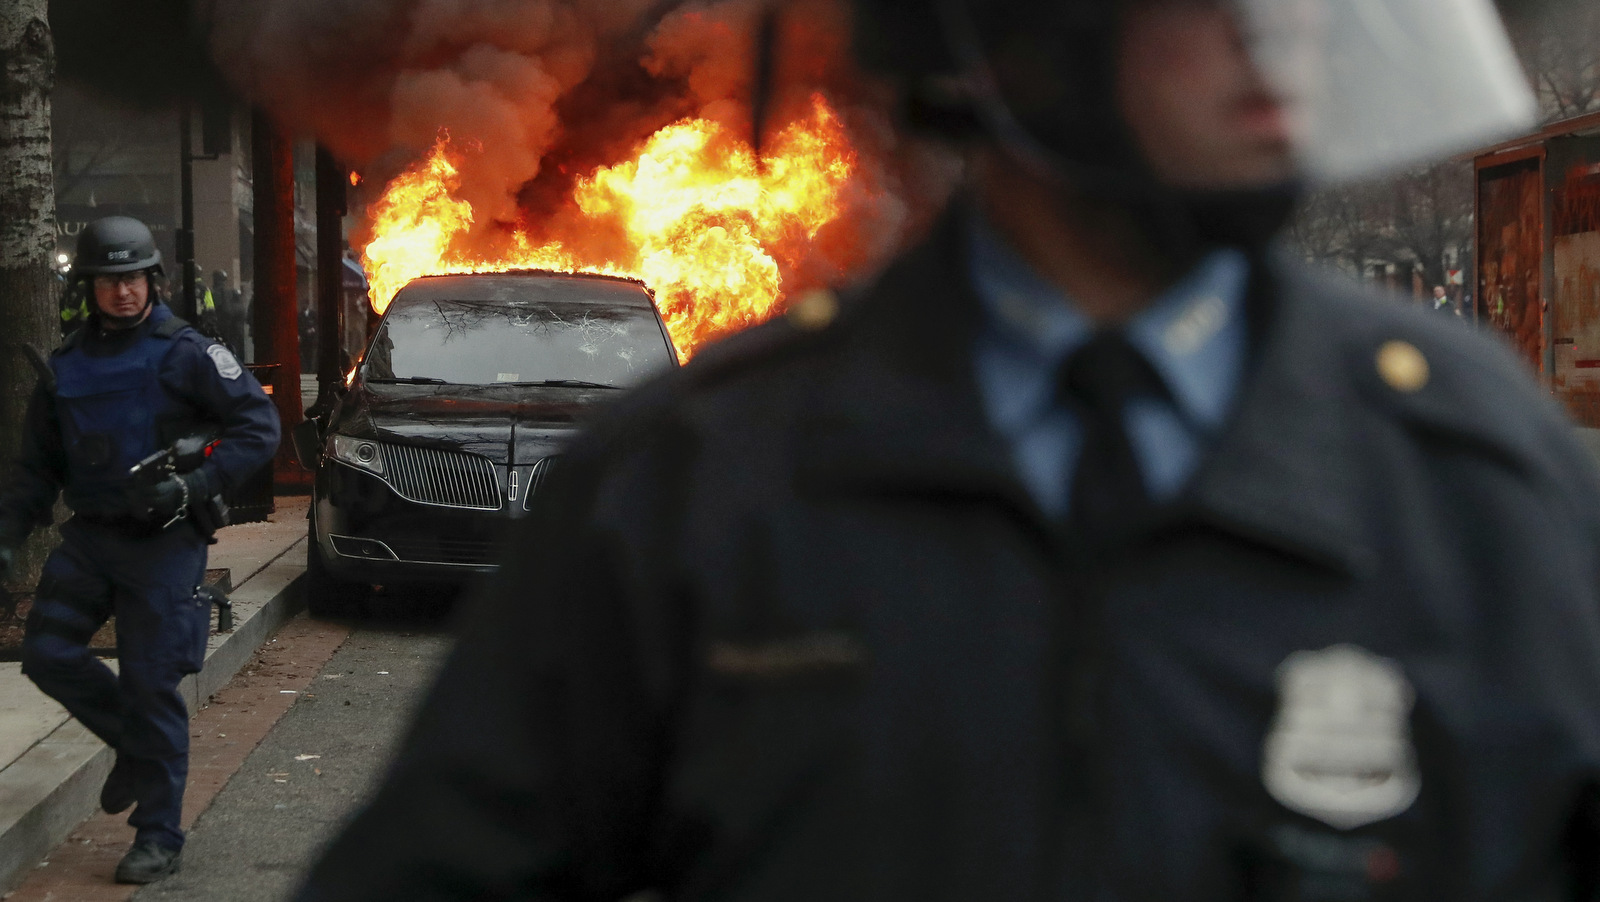 A parked limousine burns as riot police clear the street during a demonstration after the inauguration of President Donald Trump, Friday, Jan. 20, 2017, in downtown Washington. (AP/John Minchillo)